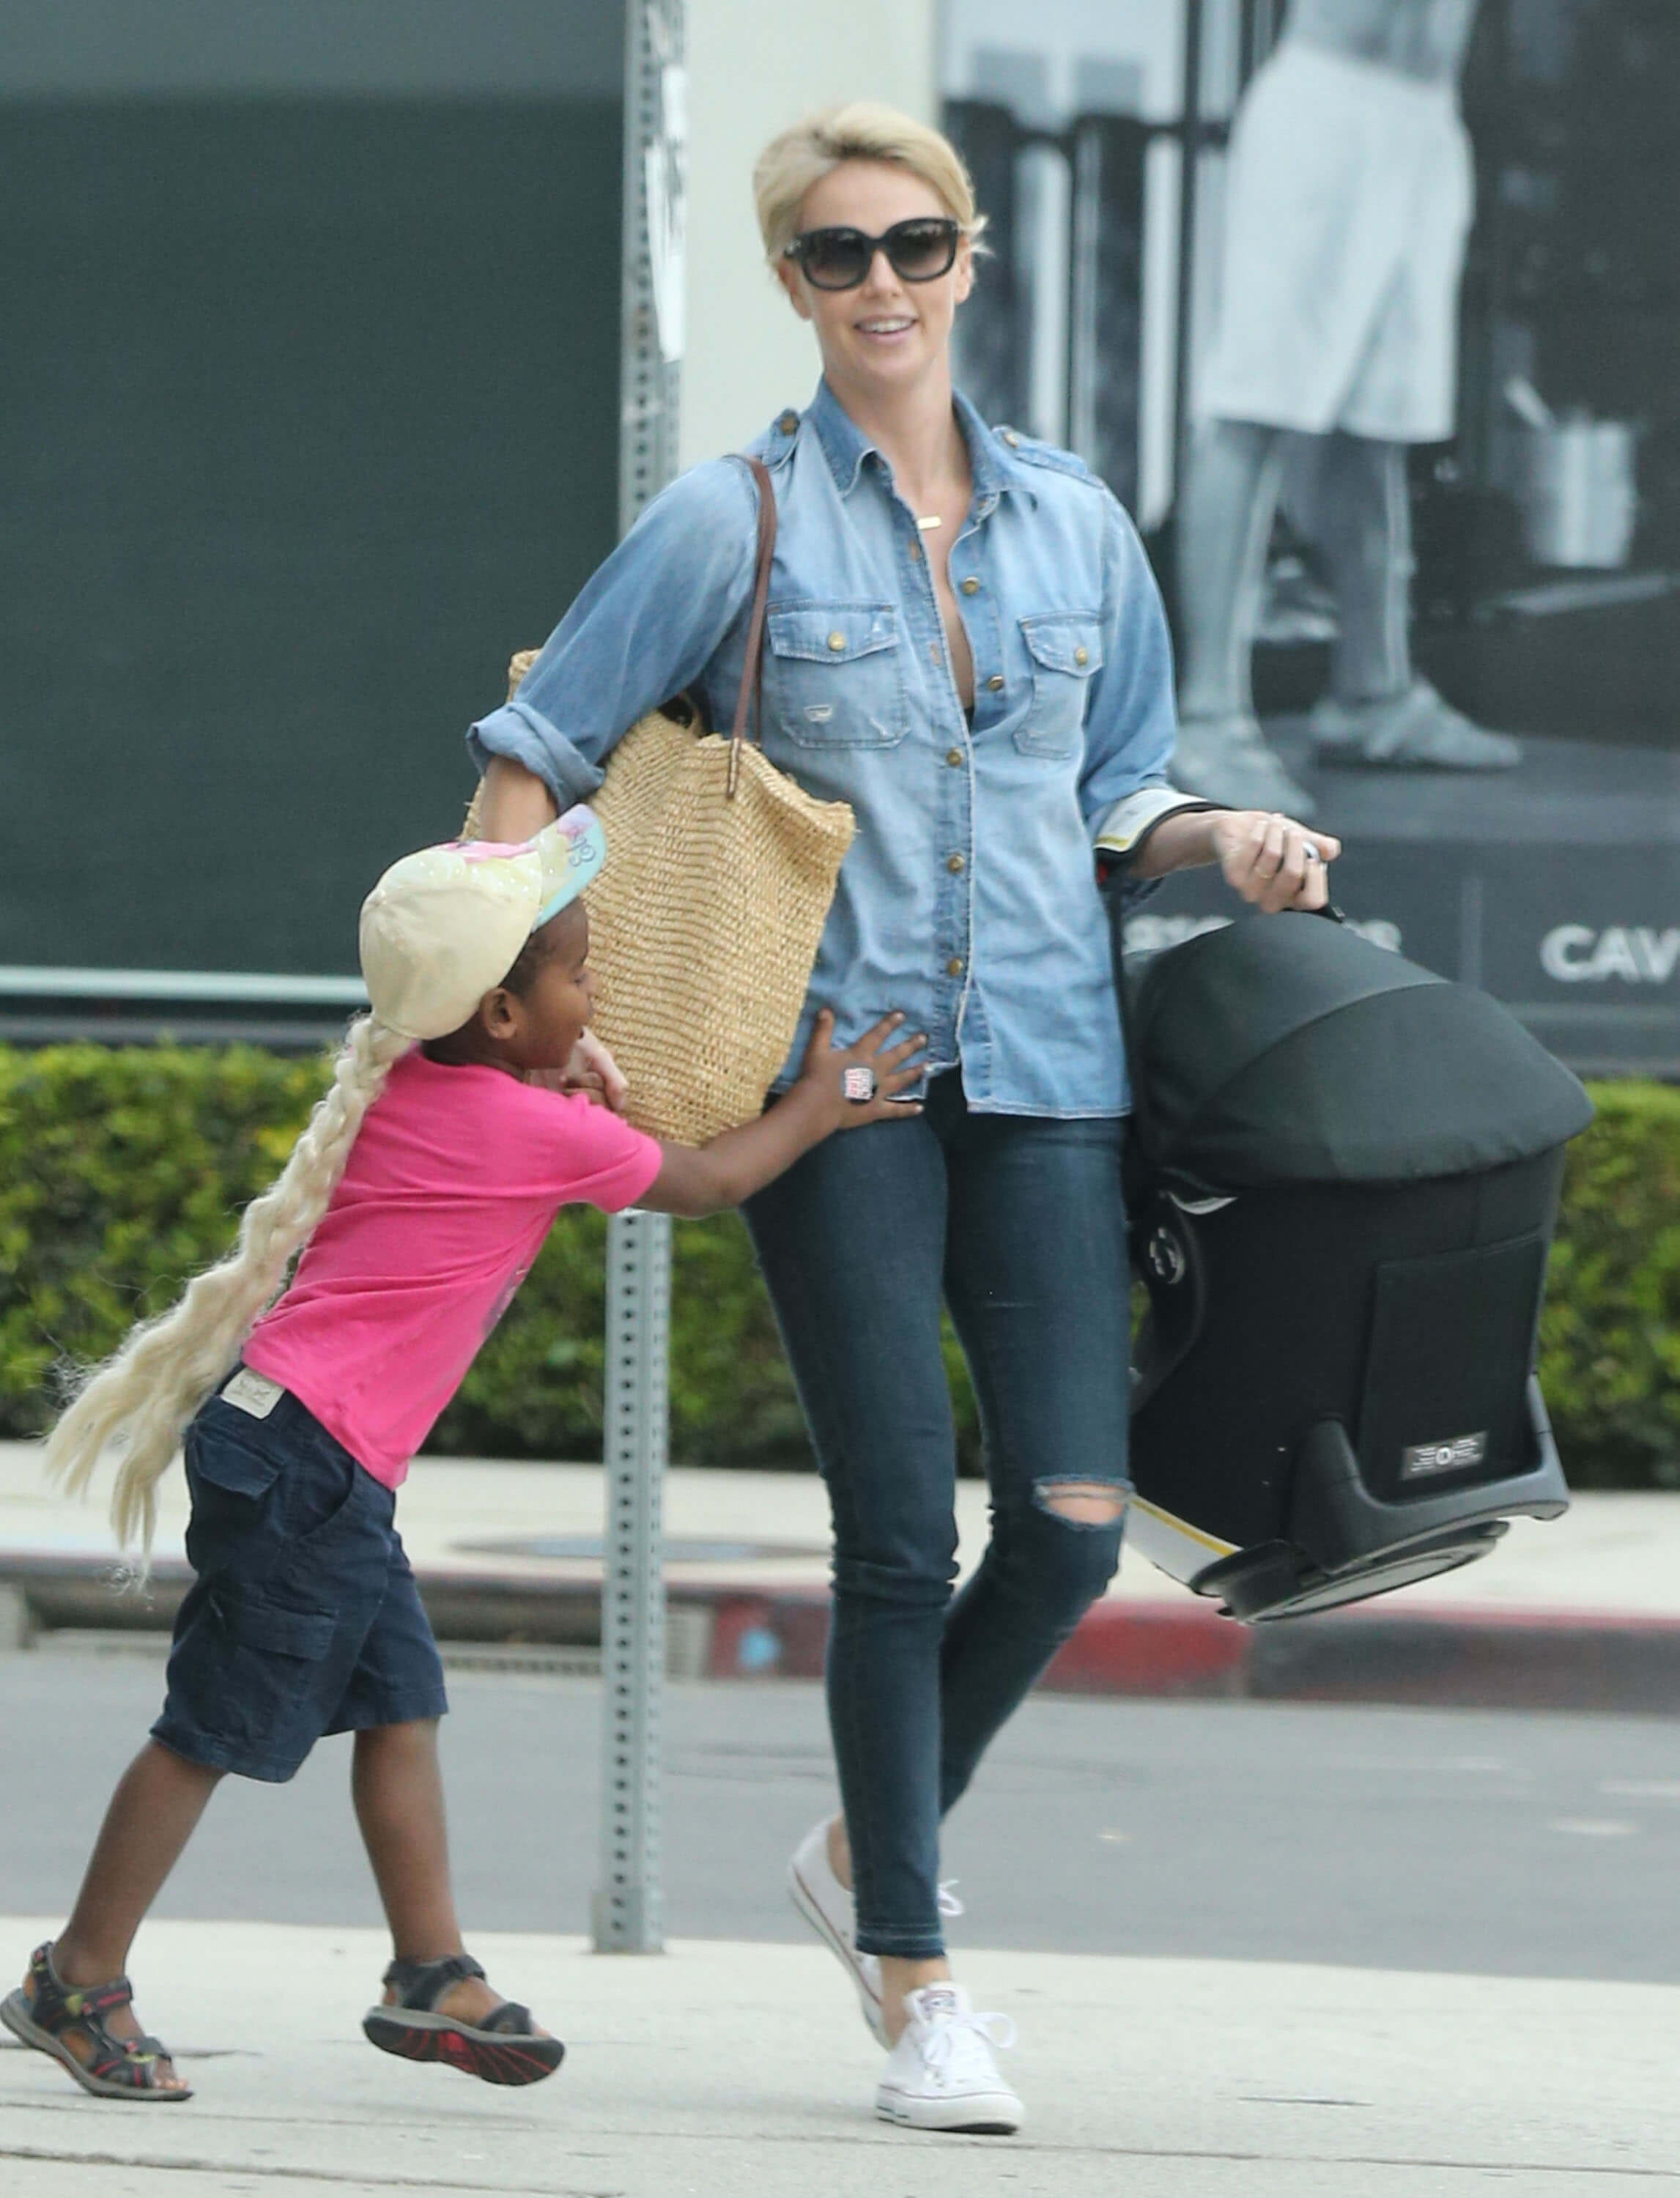 Exclusive... 51881071 Actress Charlize Theron spotted out with her new baby daughter, August in Hollywood, California on October 16, 2015. Her son Jackson is wearing a pink t-shirt and Elsa wig. NO INTERNET USE WITHOUT PRIOR AGREEMENT FameFlynet, Inc - Beverly Hills, CA, USA - +1 (818) 307-4813